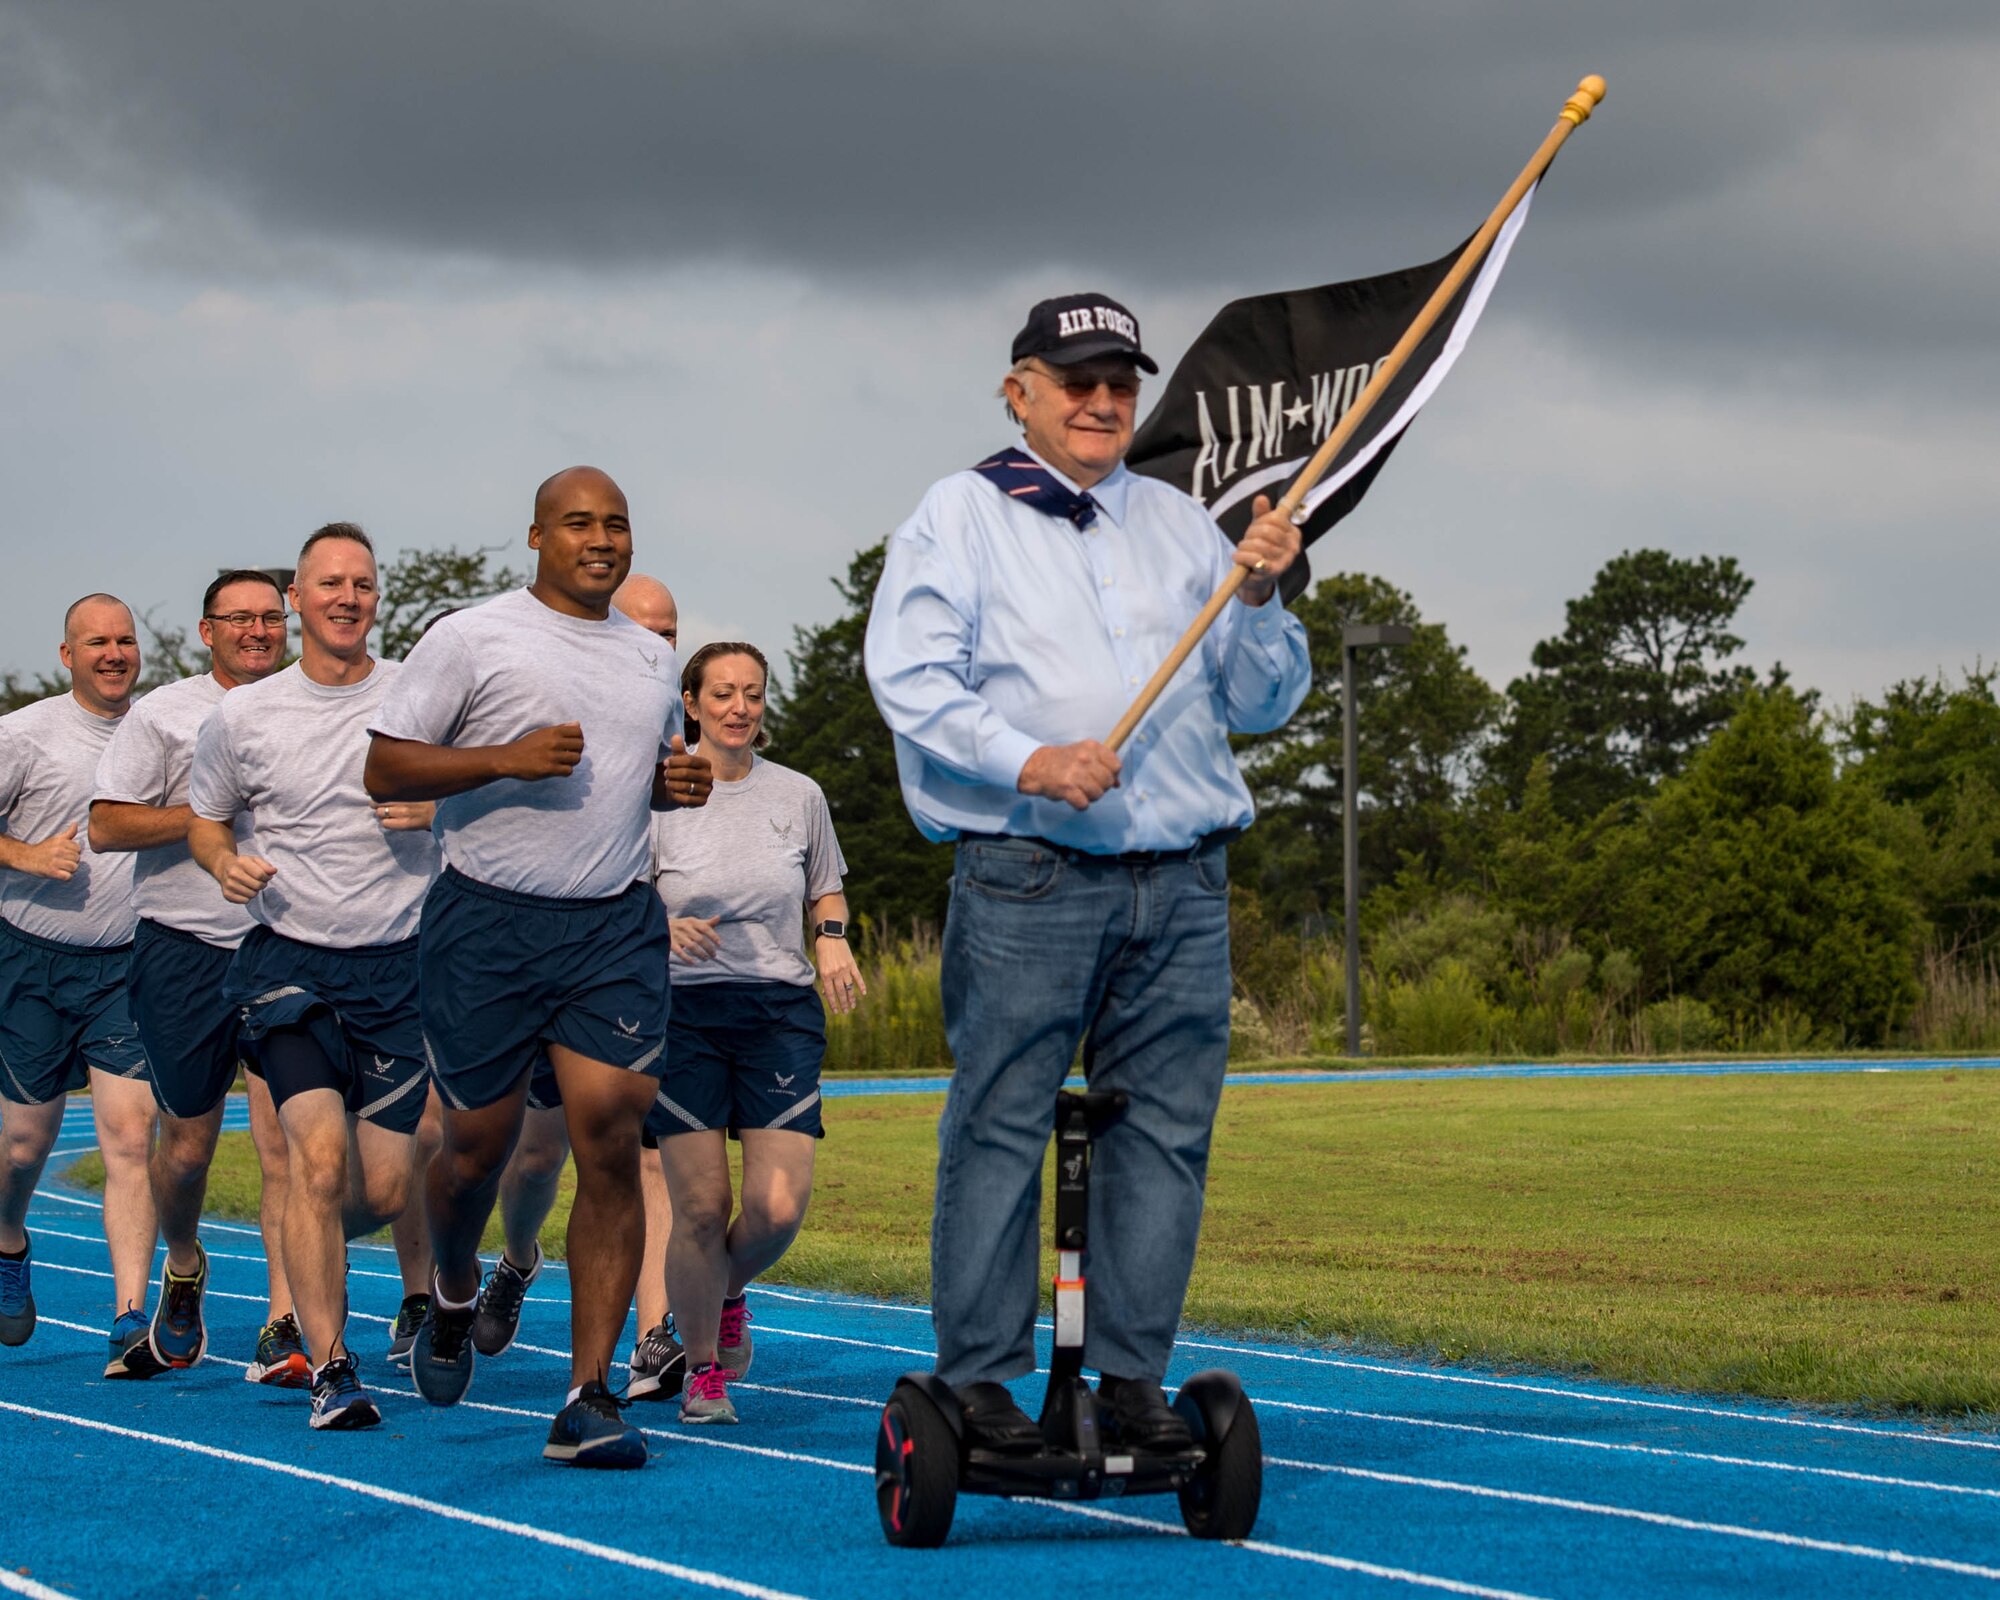 U.S. Air Force Retired William “Blister” Townsley leads the first two laps during the POW/MIA 24-hour Recognition Run opening ceremony at Joint Base Langley-Eustis, Virginia, Sept. 21, 2018.